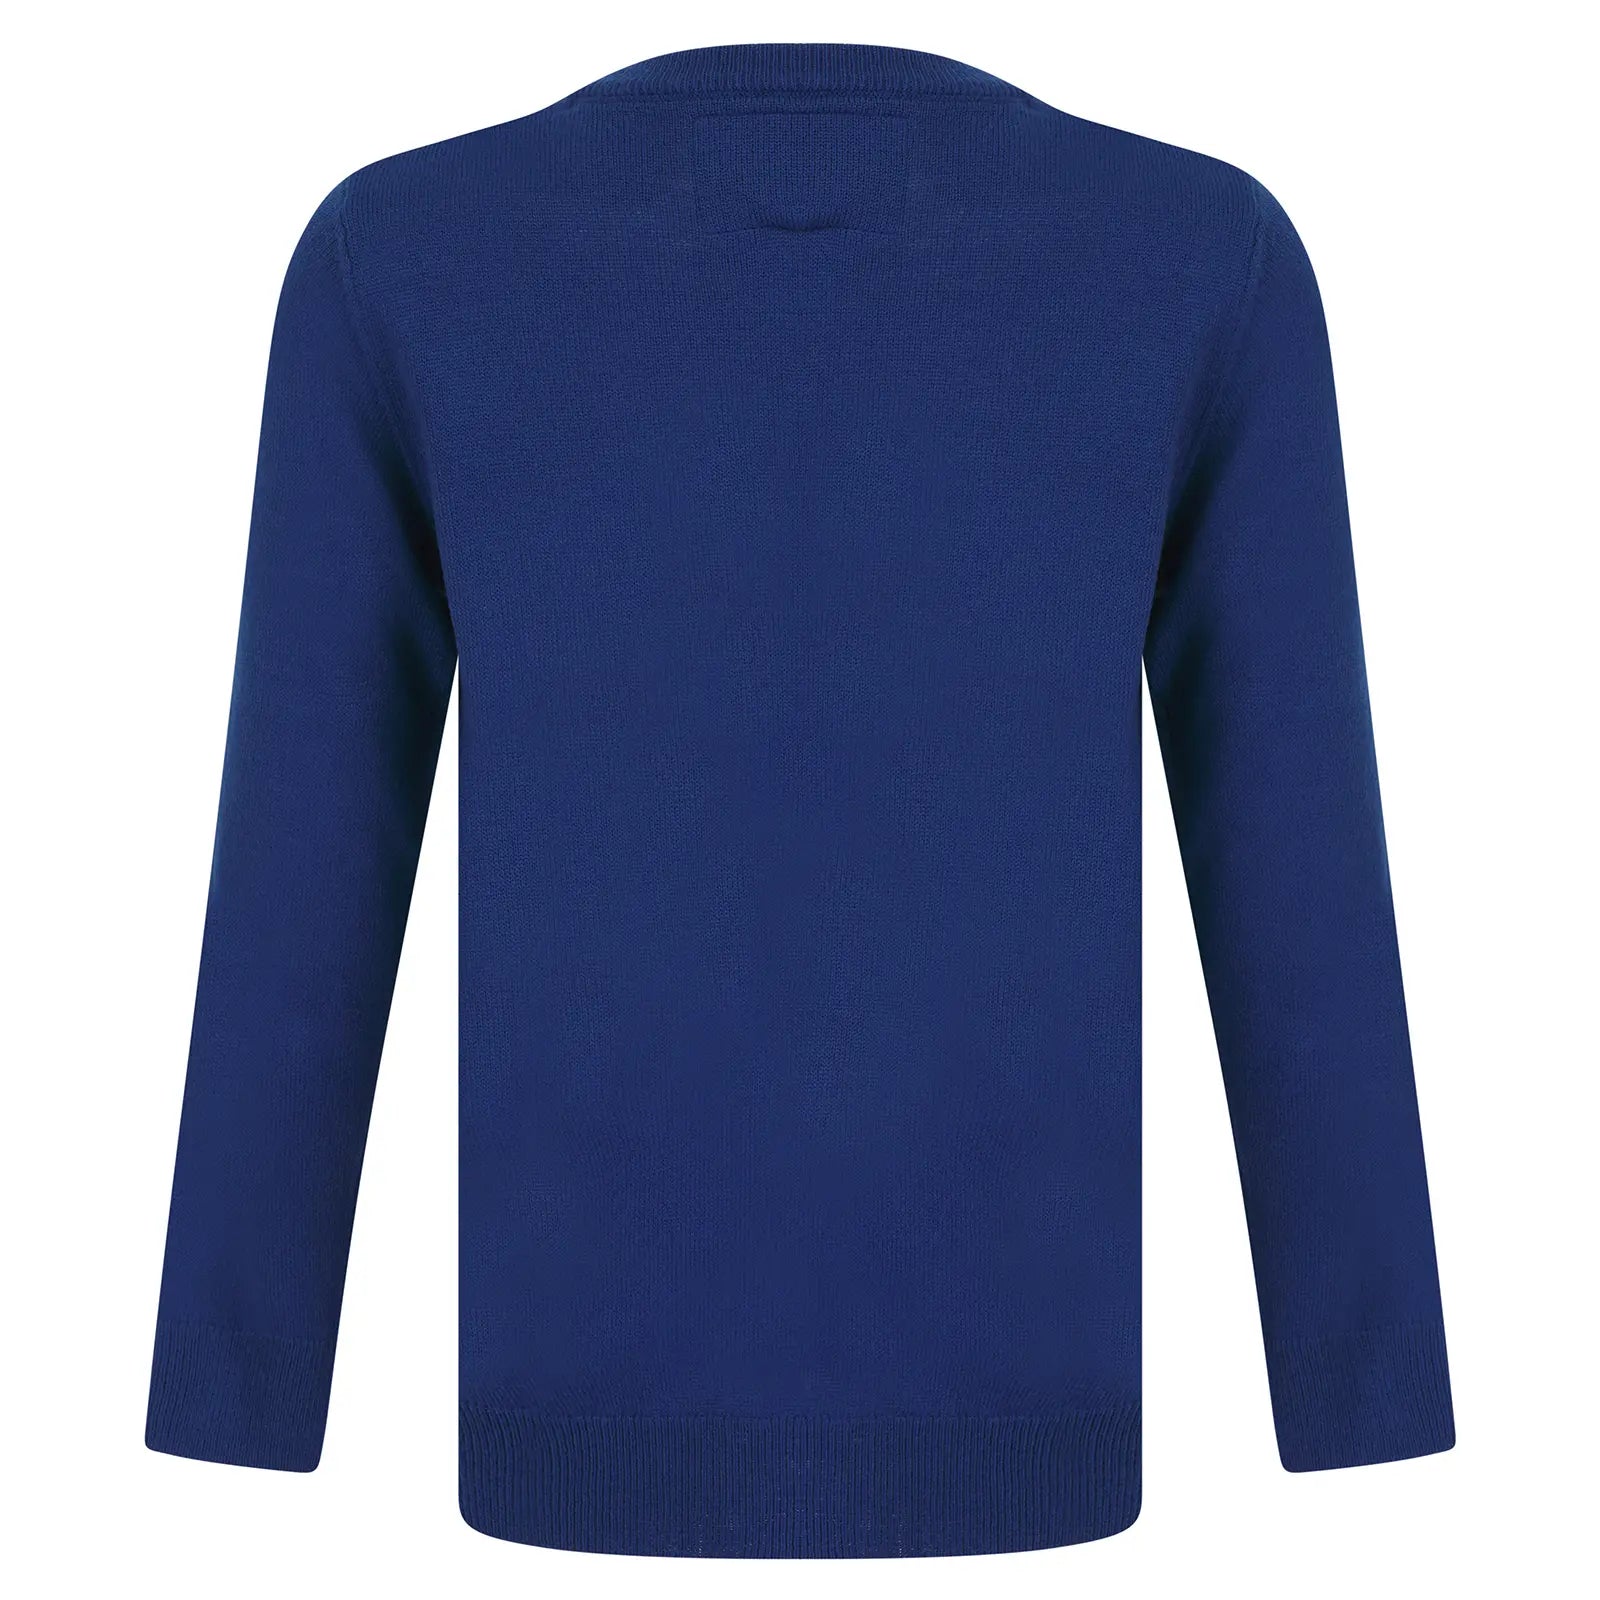 back view of acrylic knit jumper with solid blue style and ribbed arm cuffs and waist detail